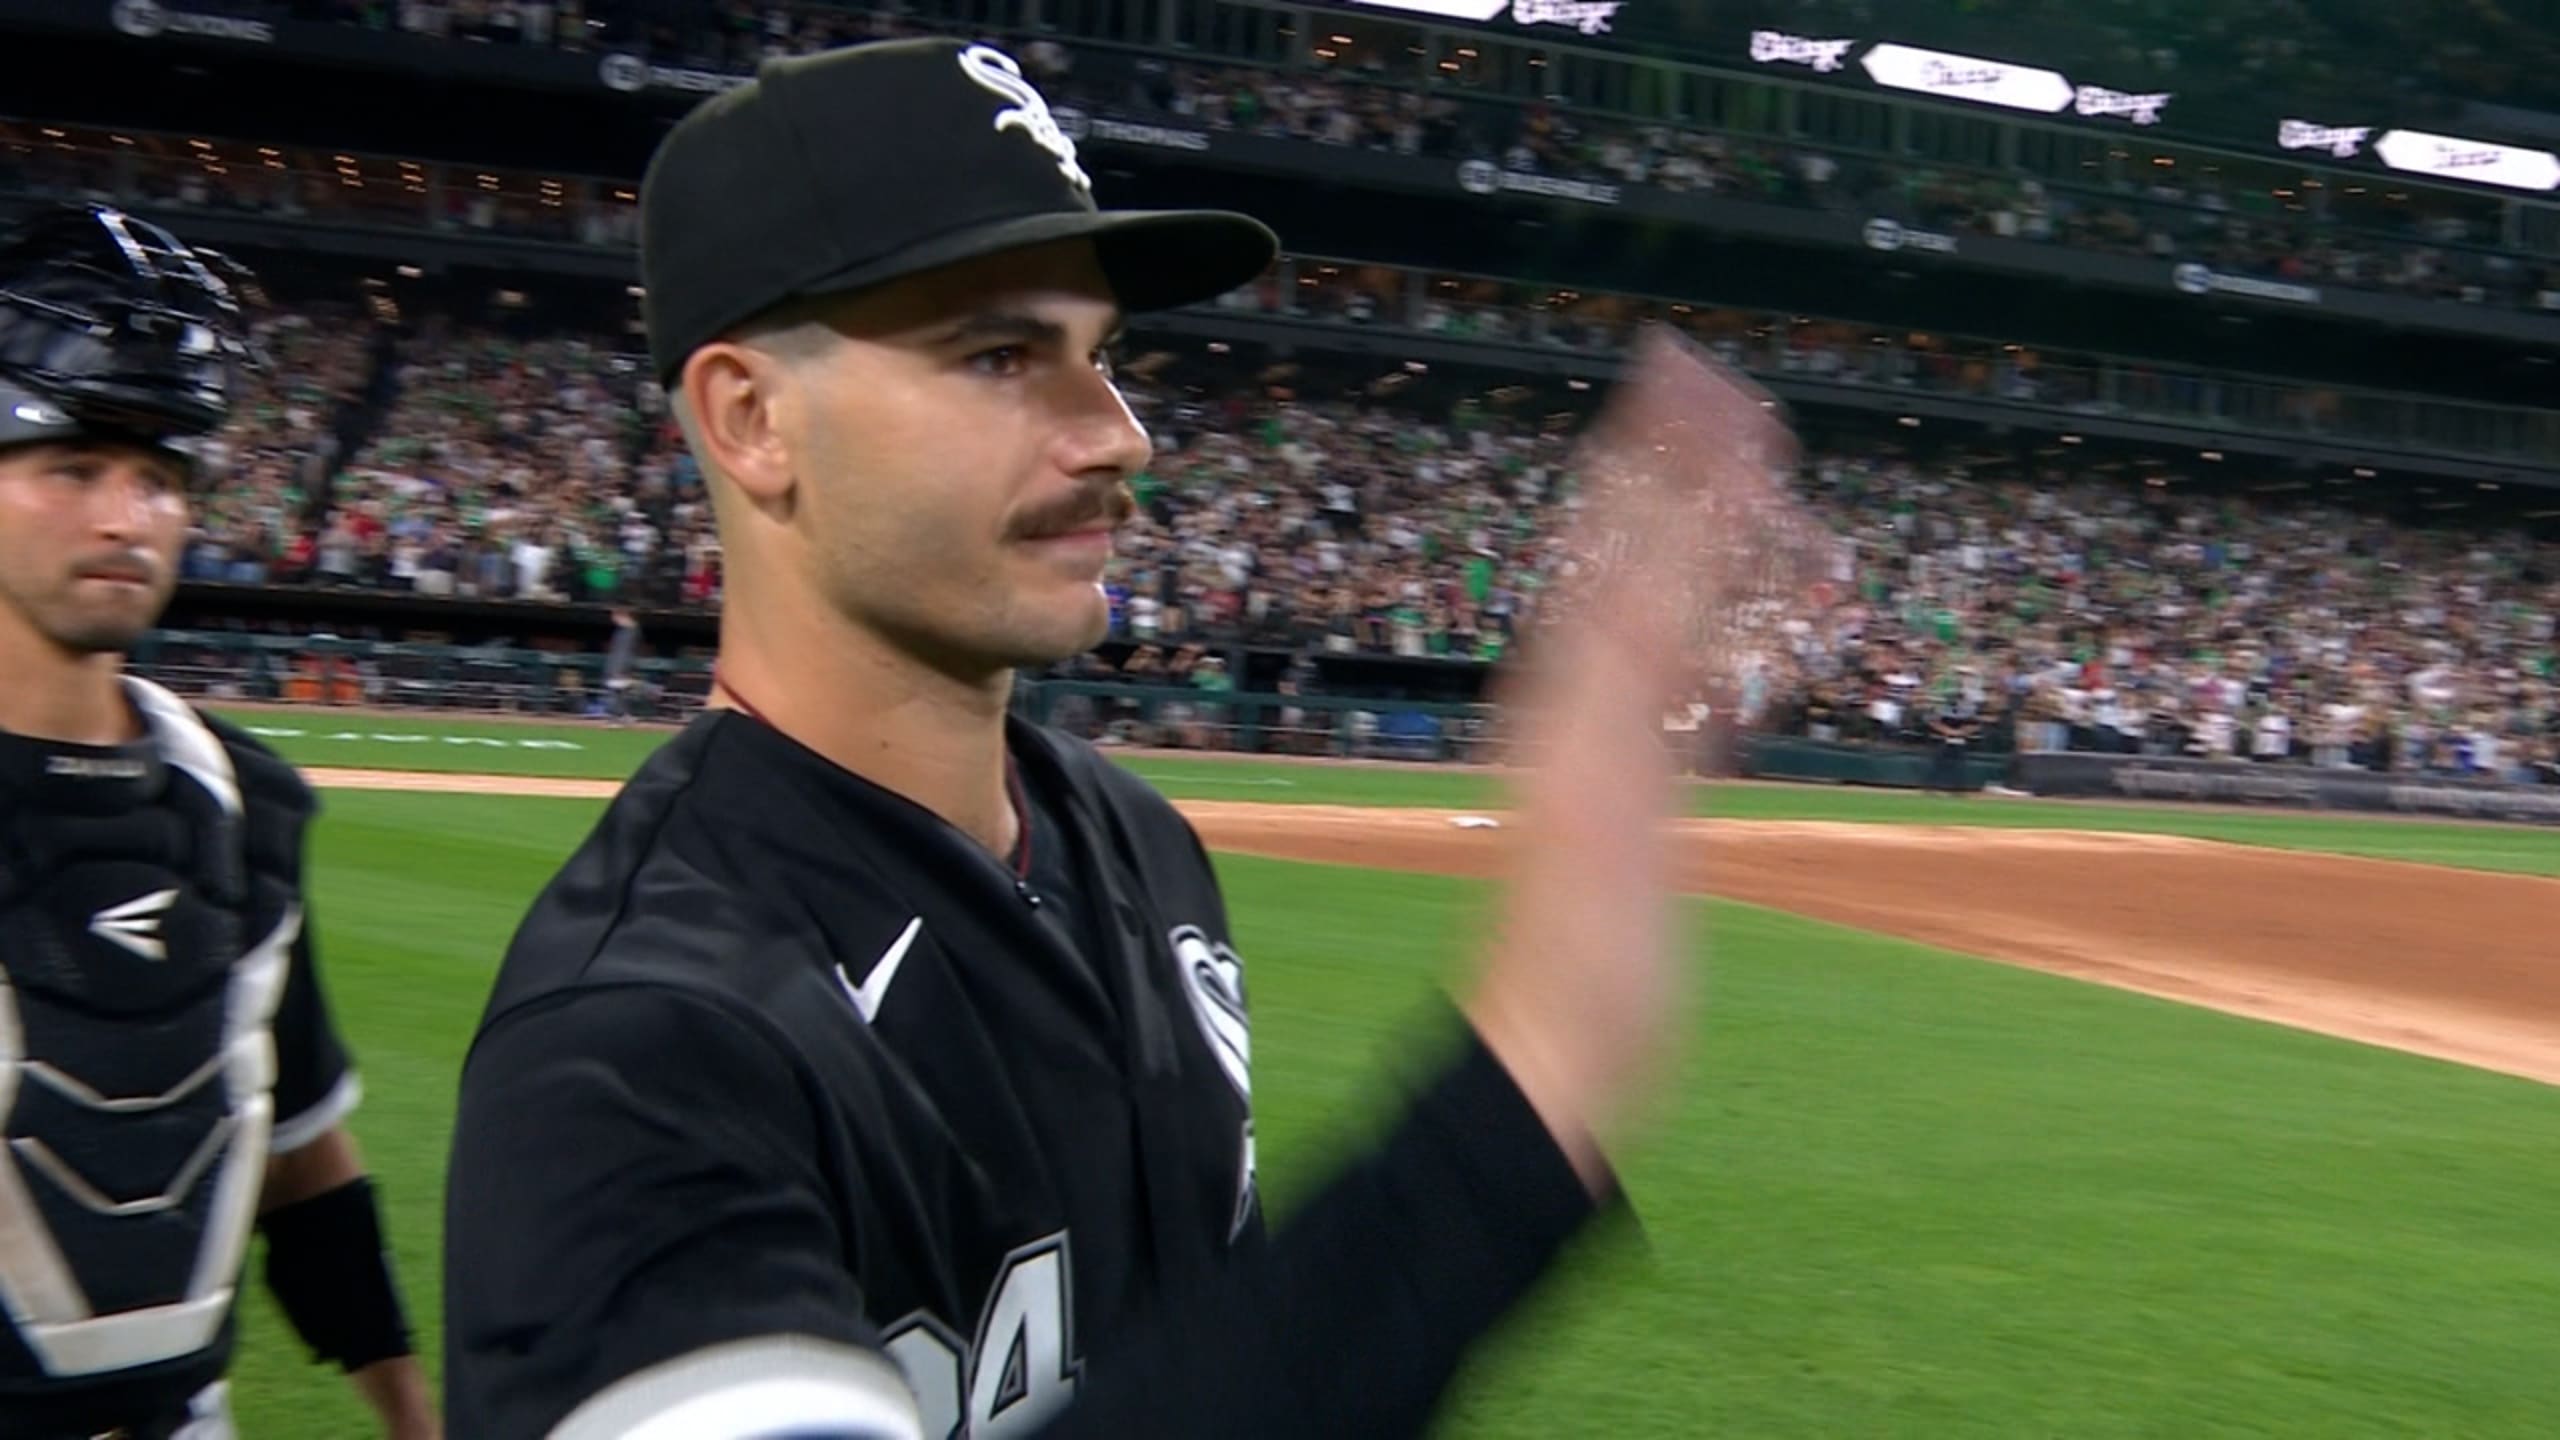 Dylan Cease - Sports Illustrated